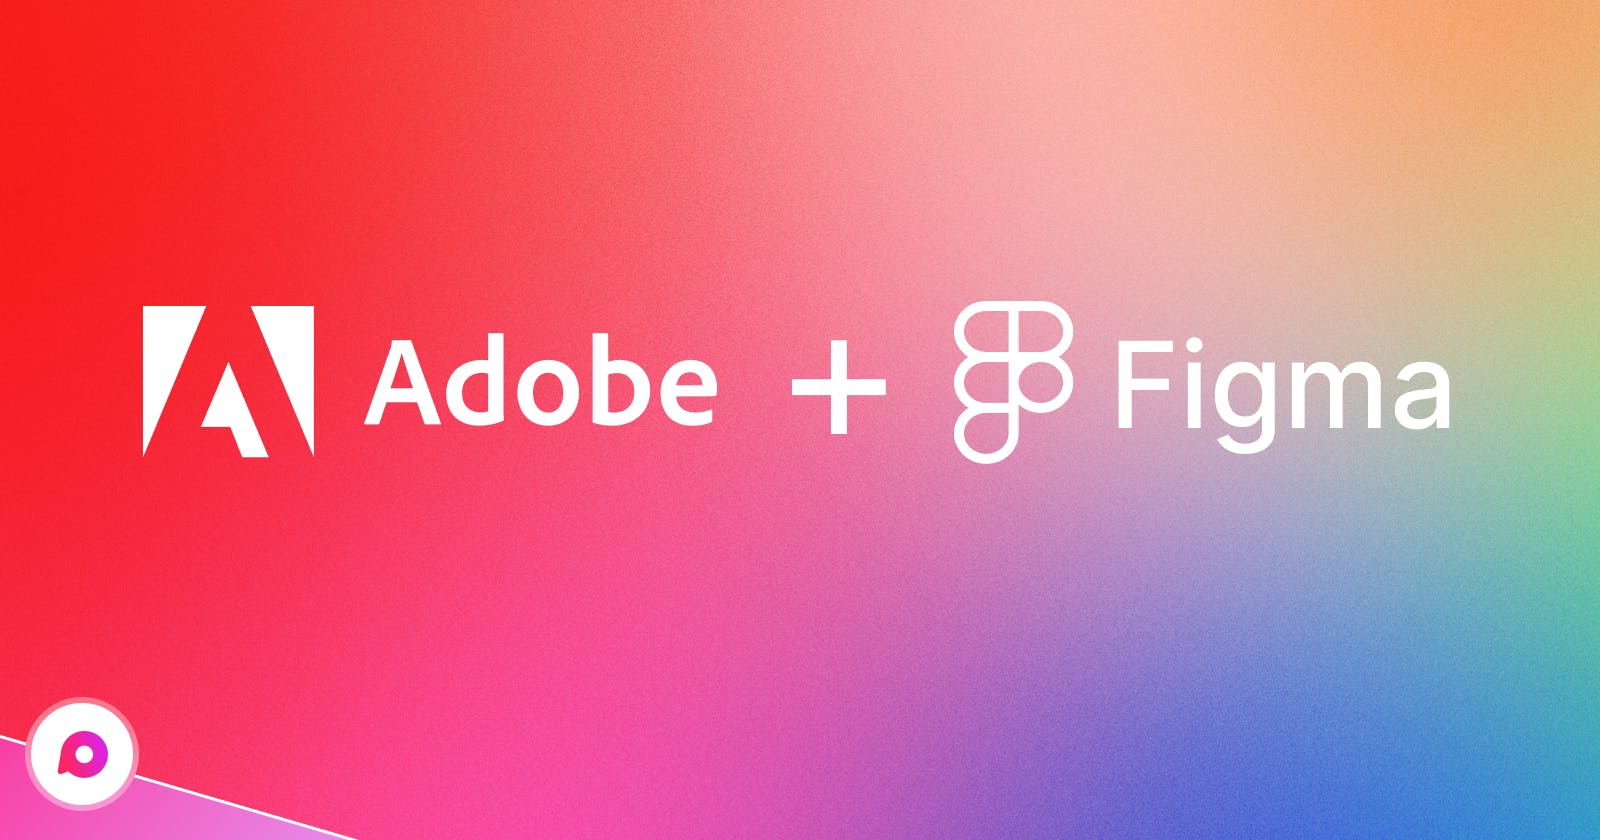 Adobe to acquire Figma for $20 billion: What does it mean for users?